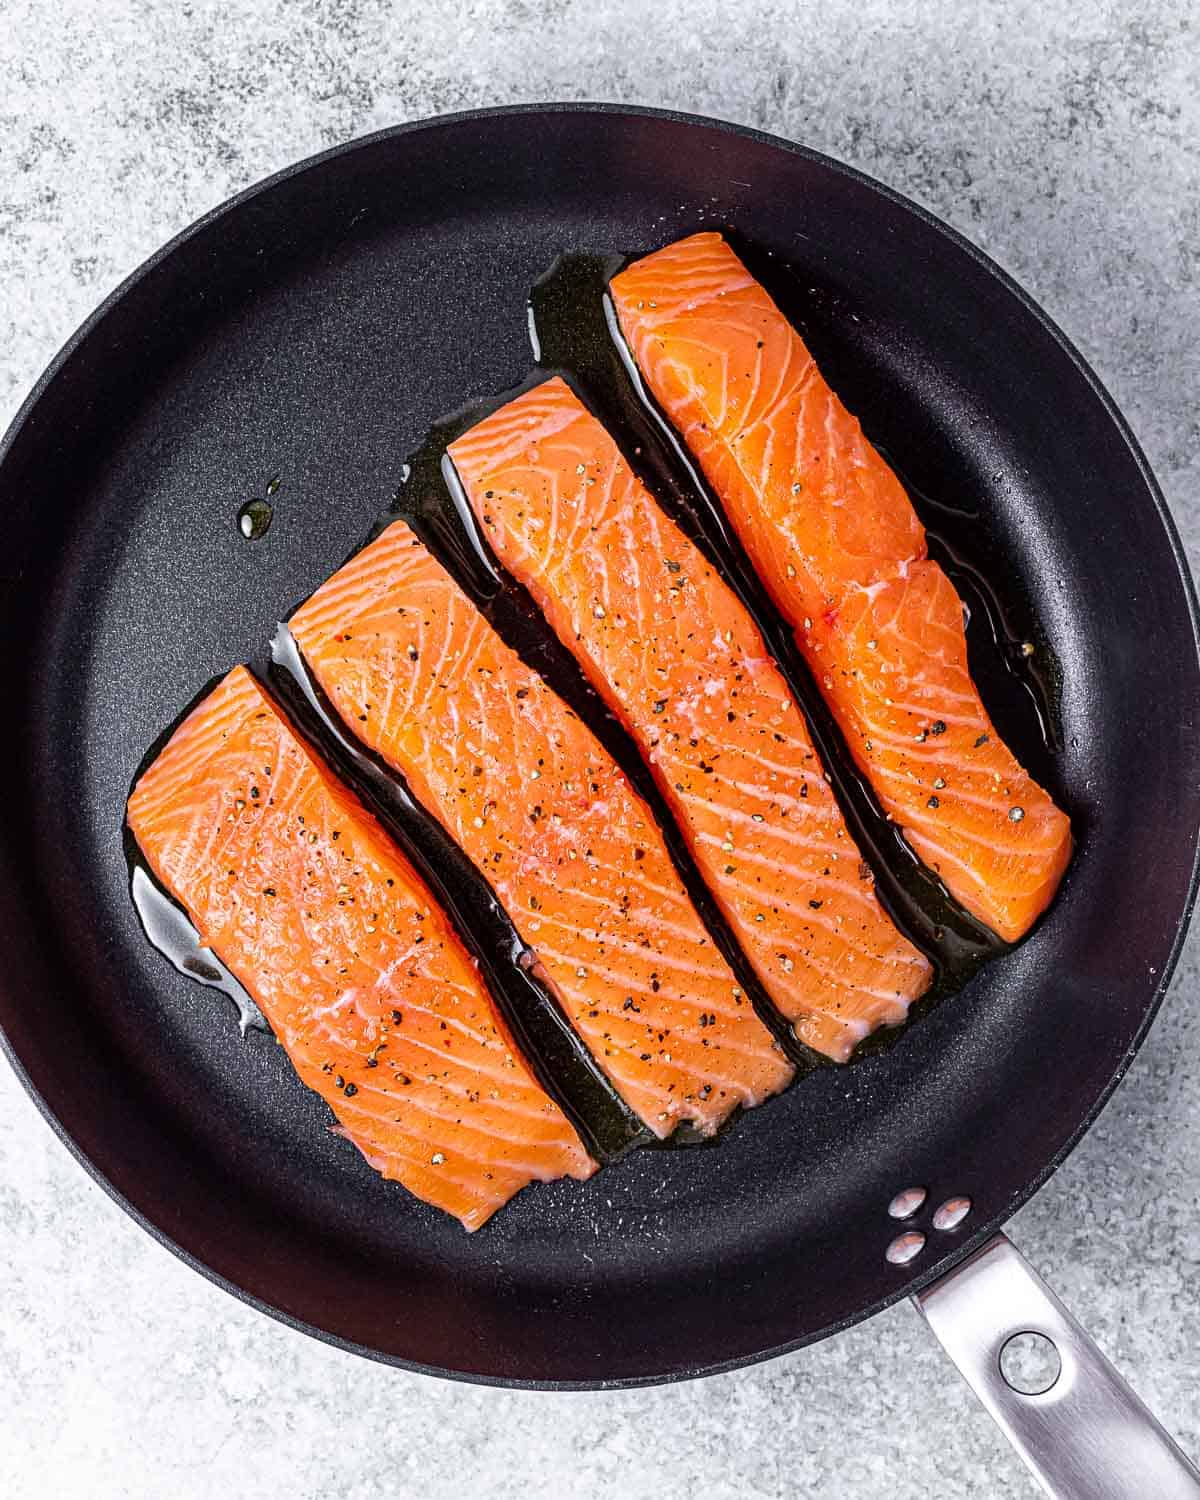 Salmon filets cooking in a large skillet.